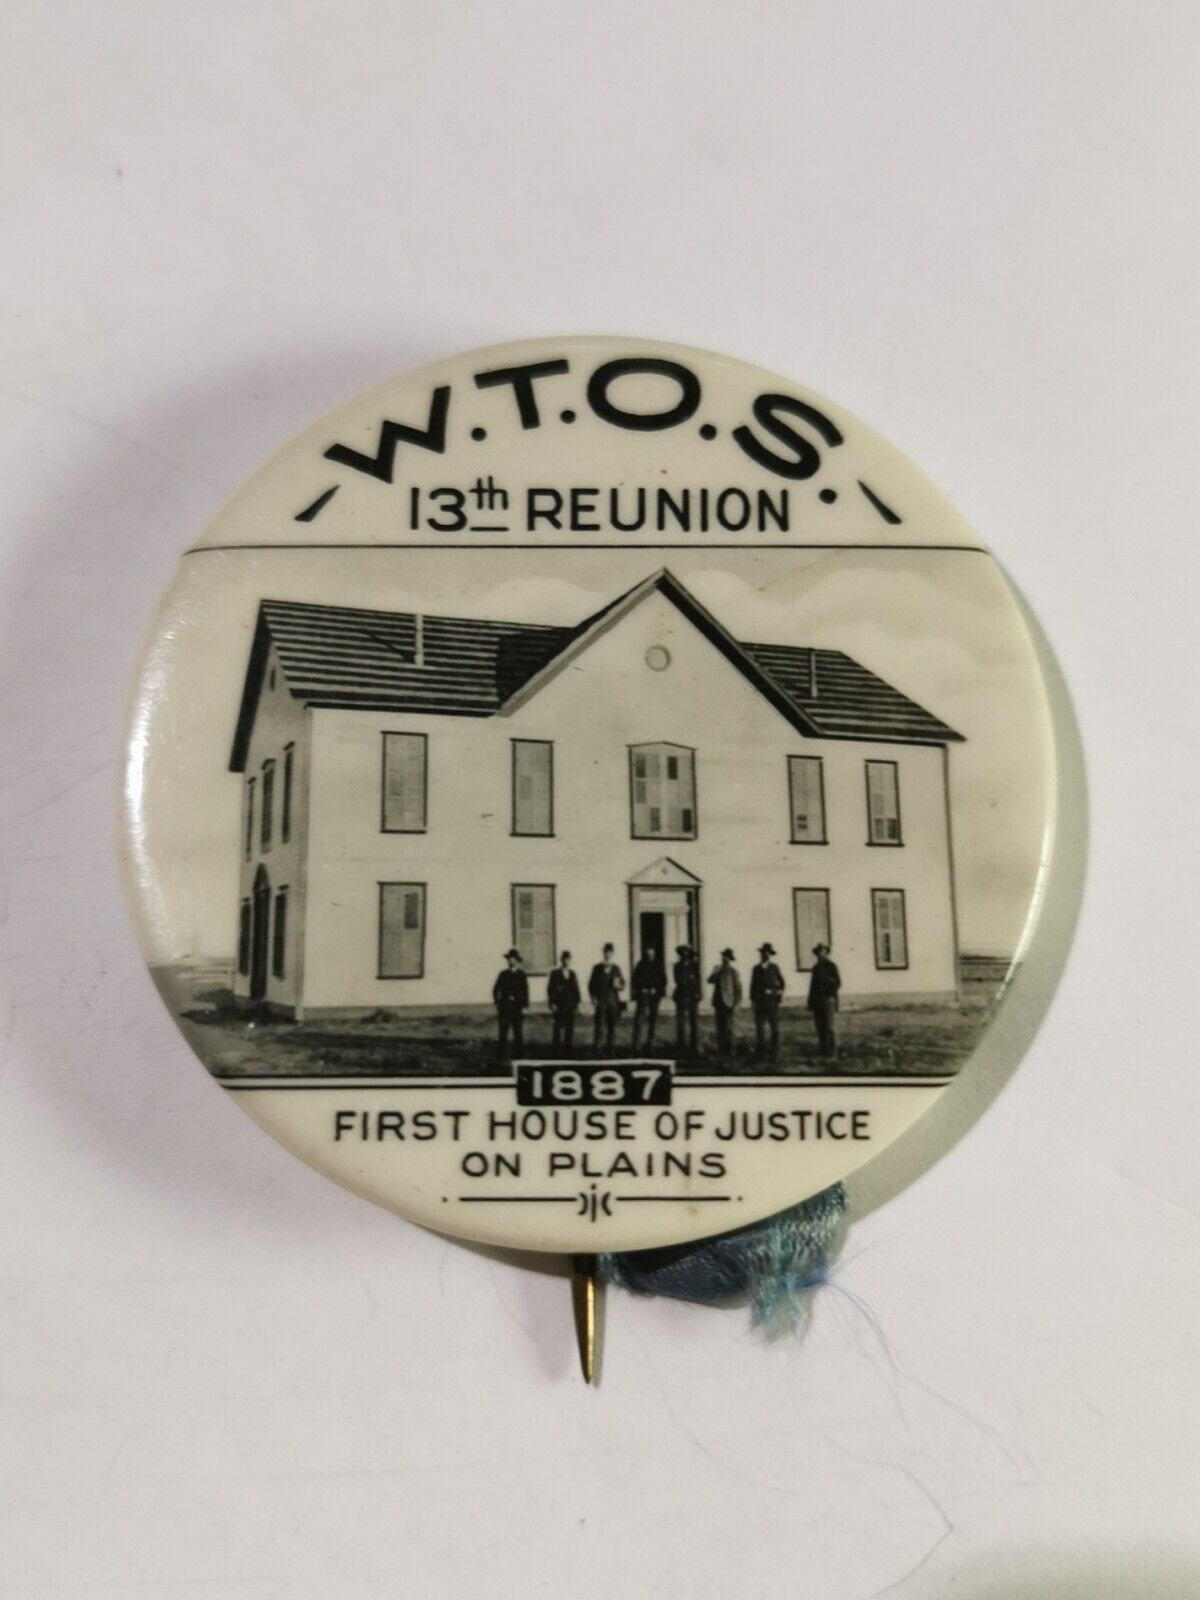 Antique 1900 WTOS 13th Reunion 1887  First House Of Justice On Plains Pin